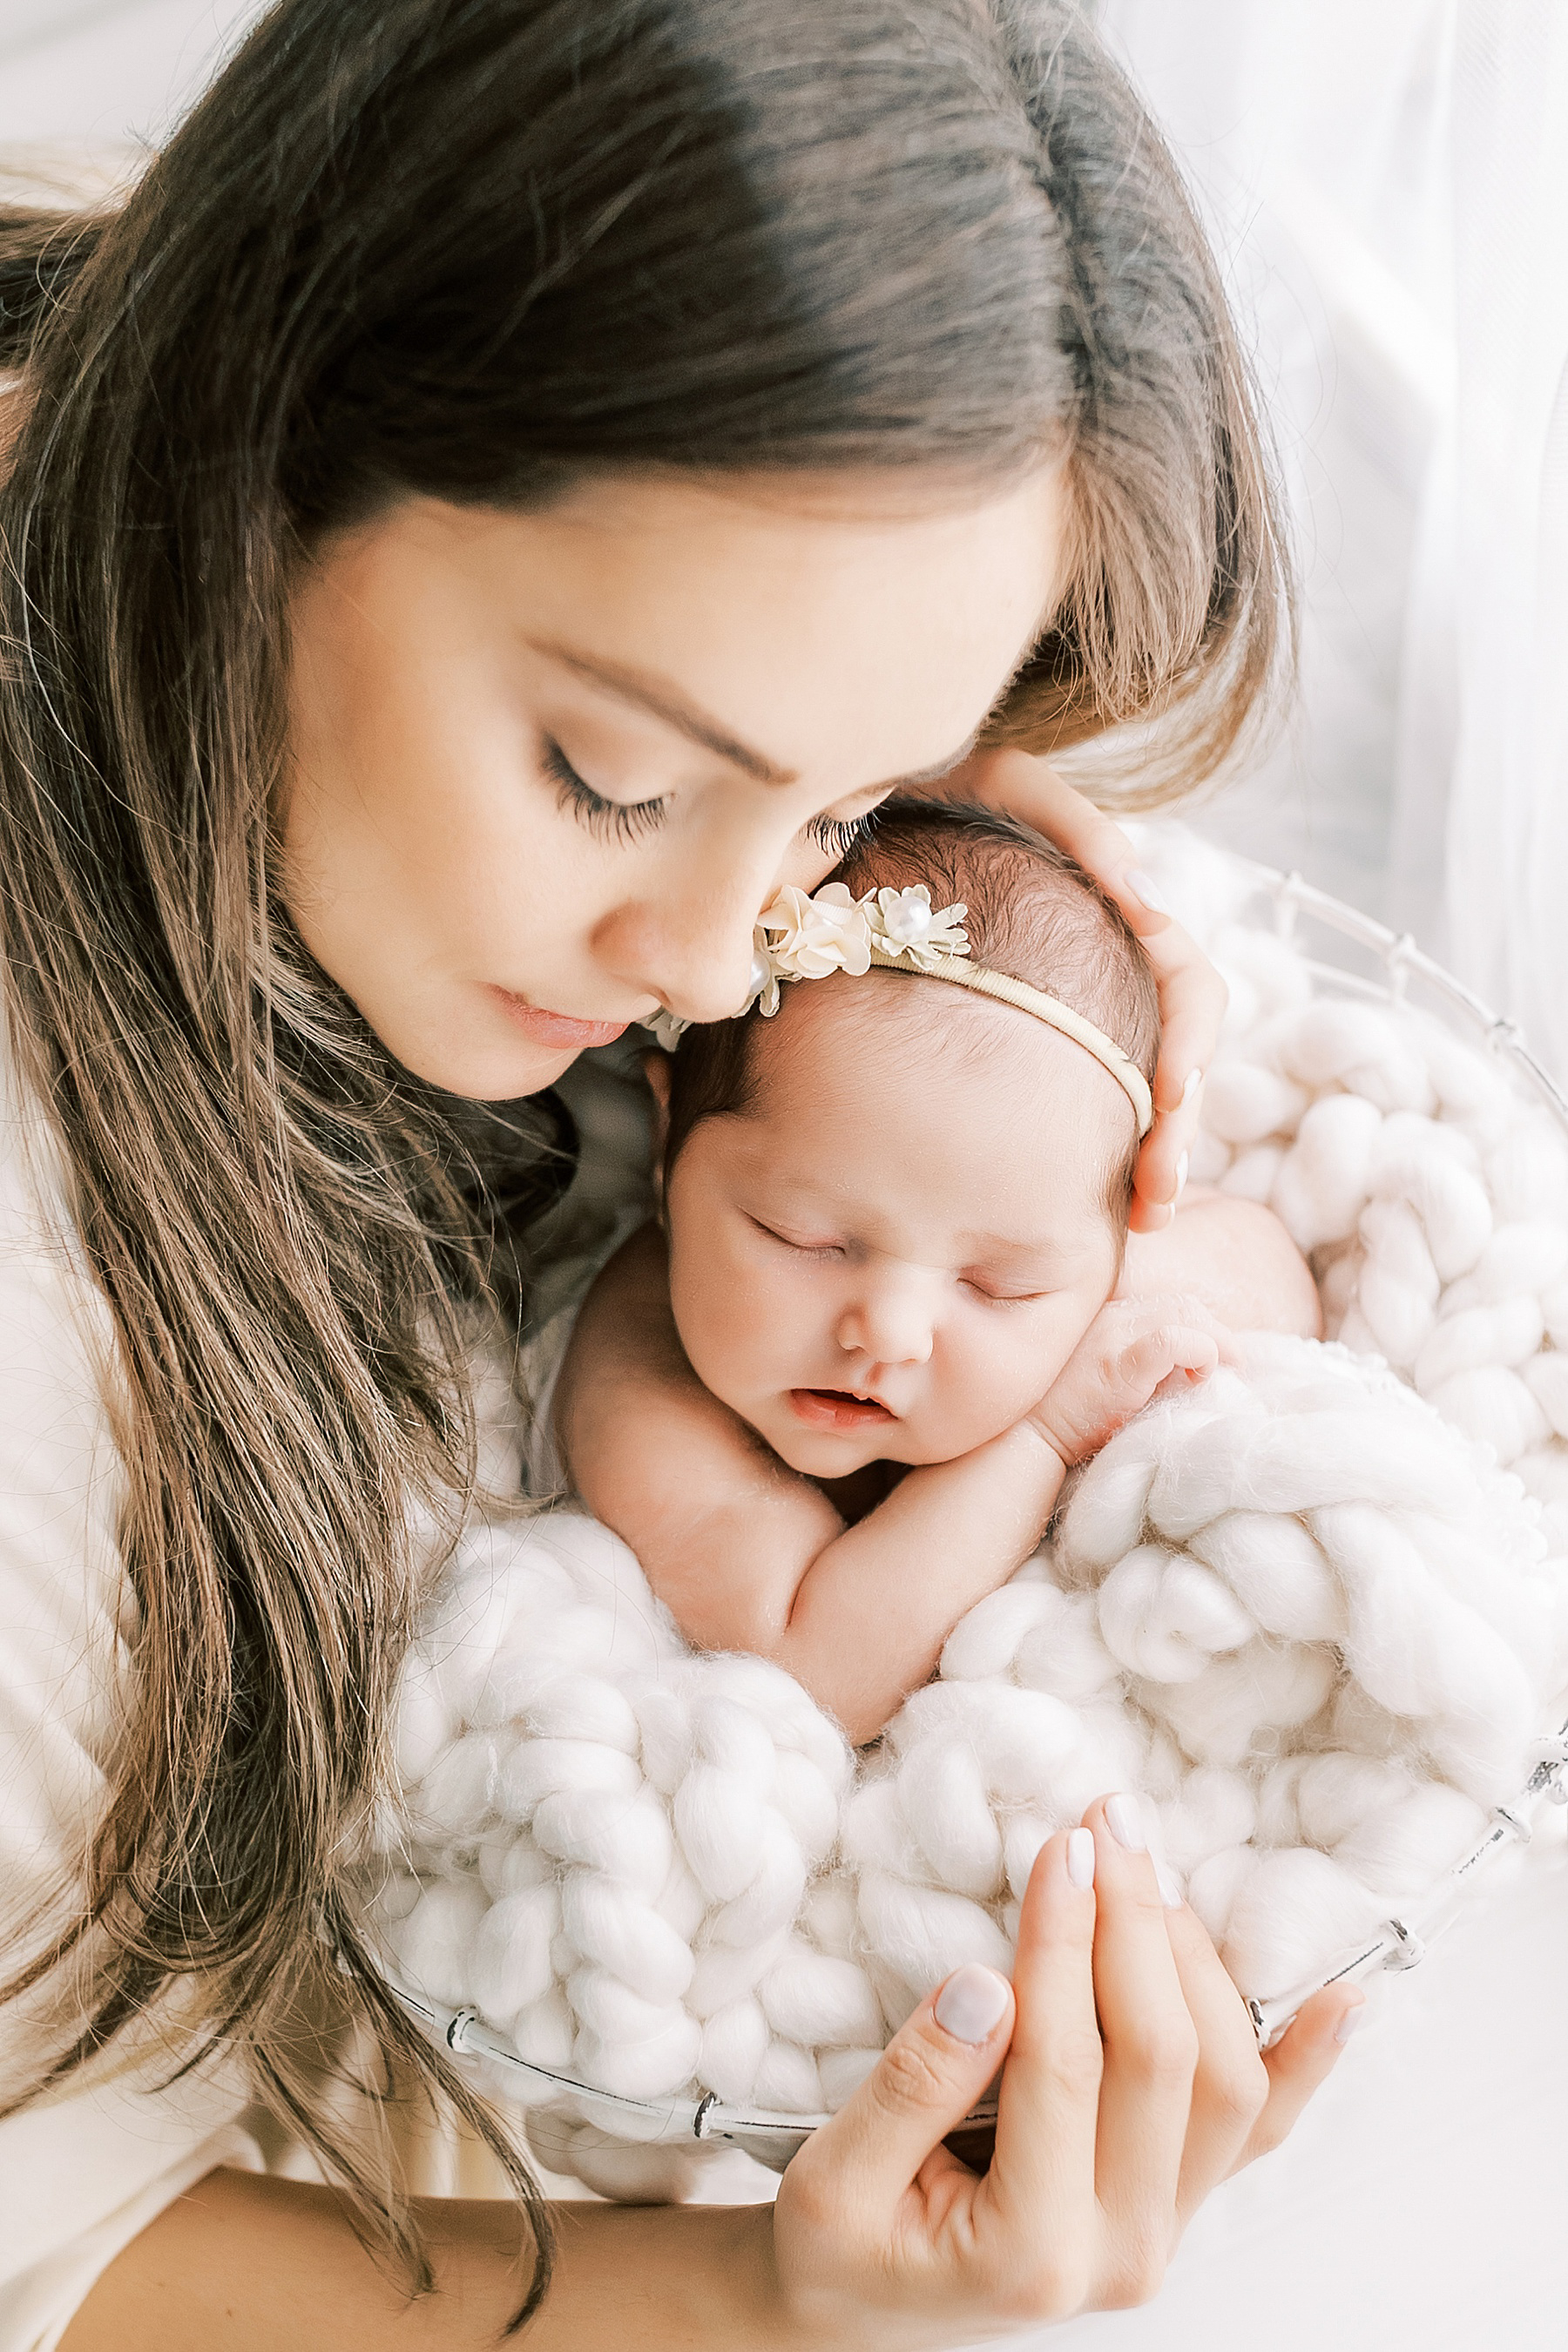 woman with long dark hair holding newborn baby in wire basket wrapped in white blanket